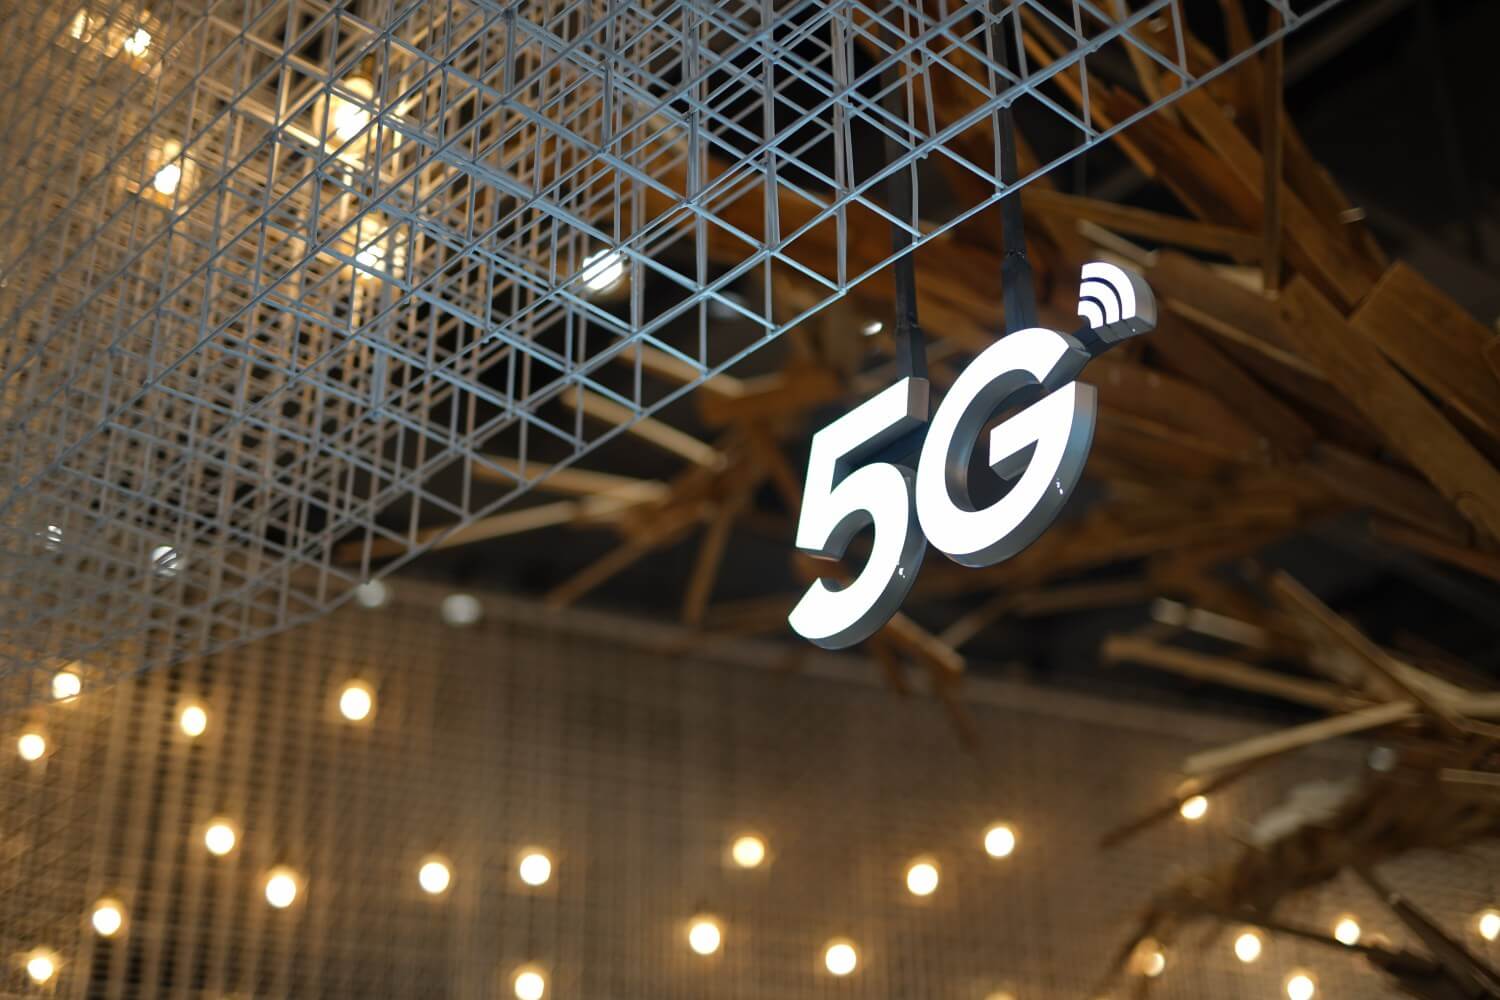 GSMA report predicts tenfold rise in 5G mobile connections in Asia Pacific by 2030 as digital transformation gathers pace